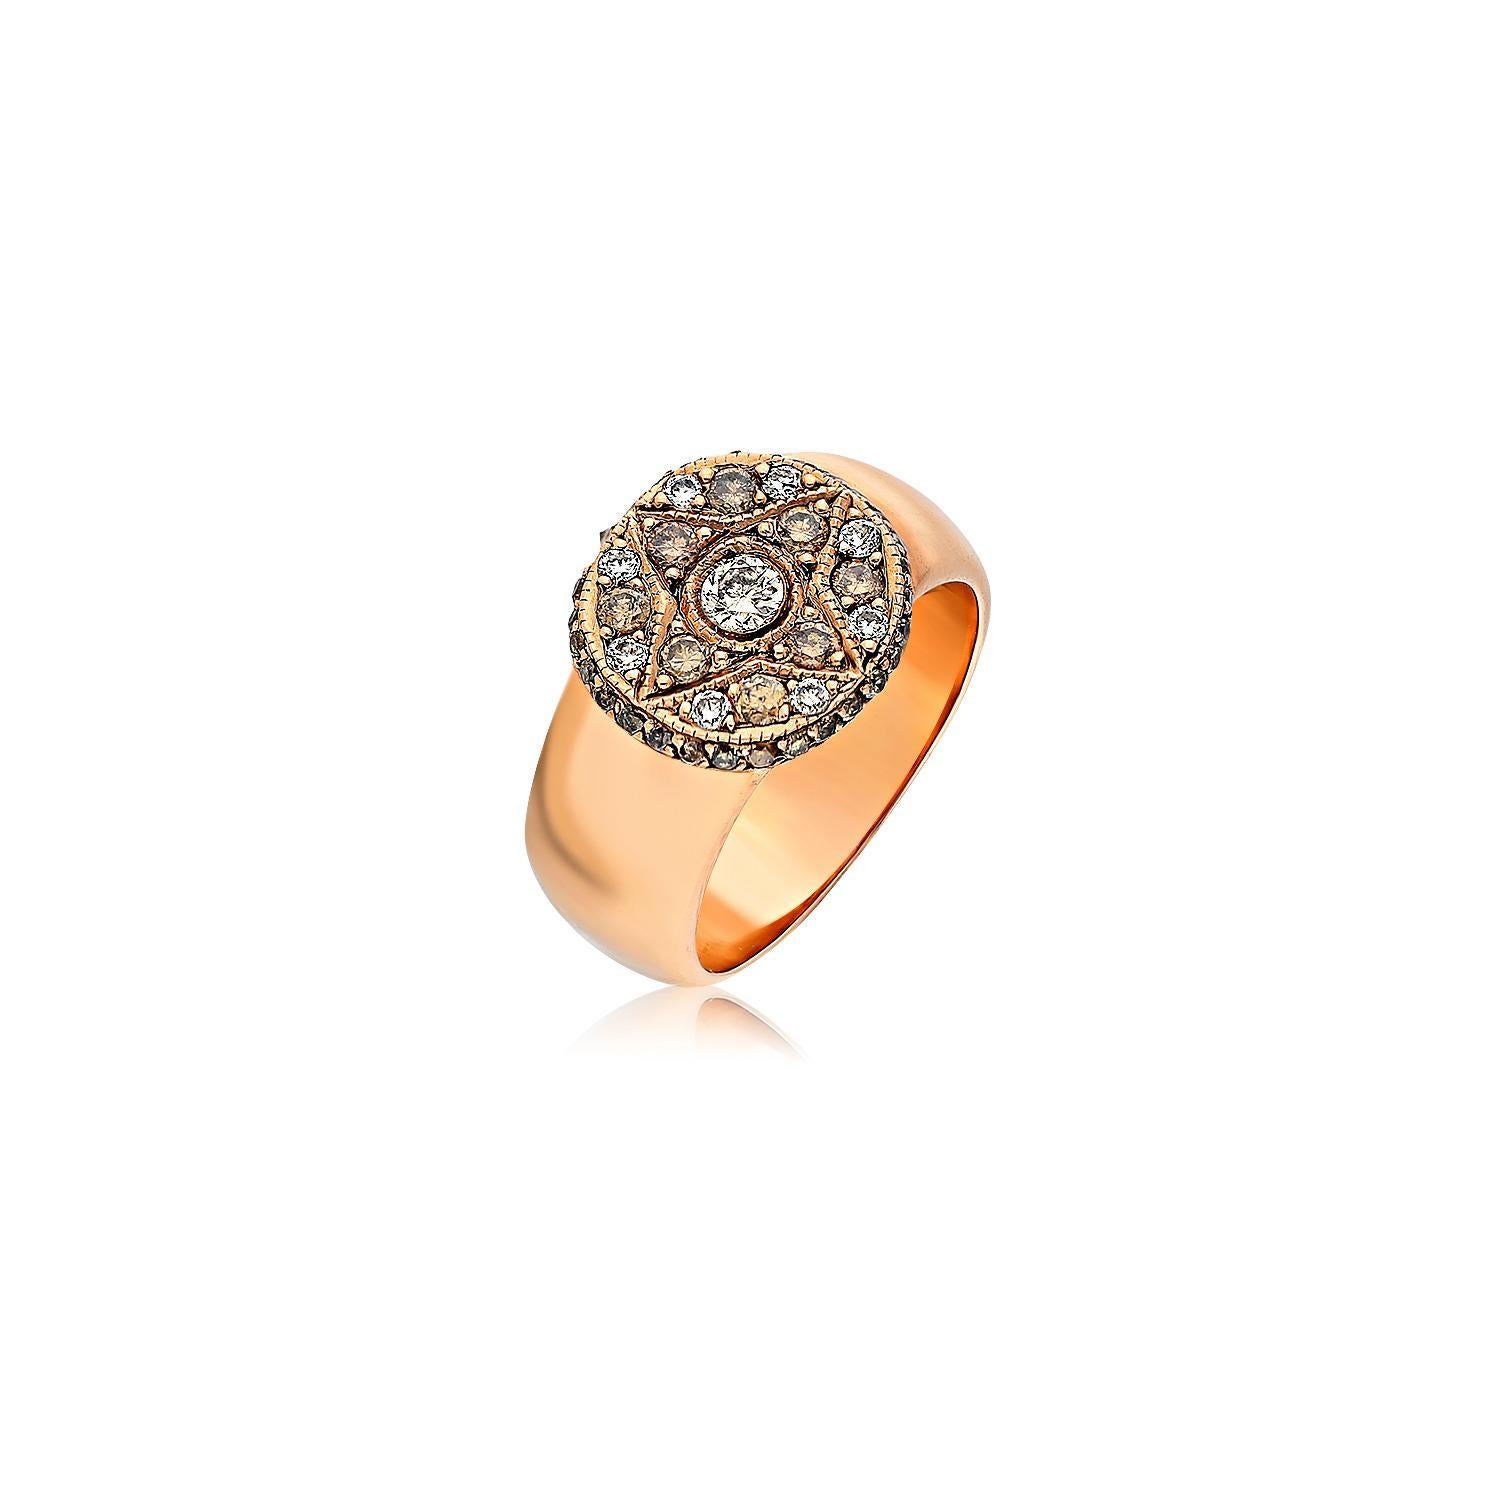 For Sale:  8k Gold Round Ring with Pave Brilliant Cut Diamonds 3